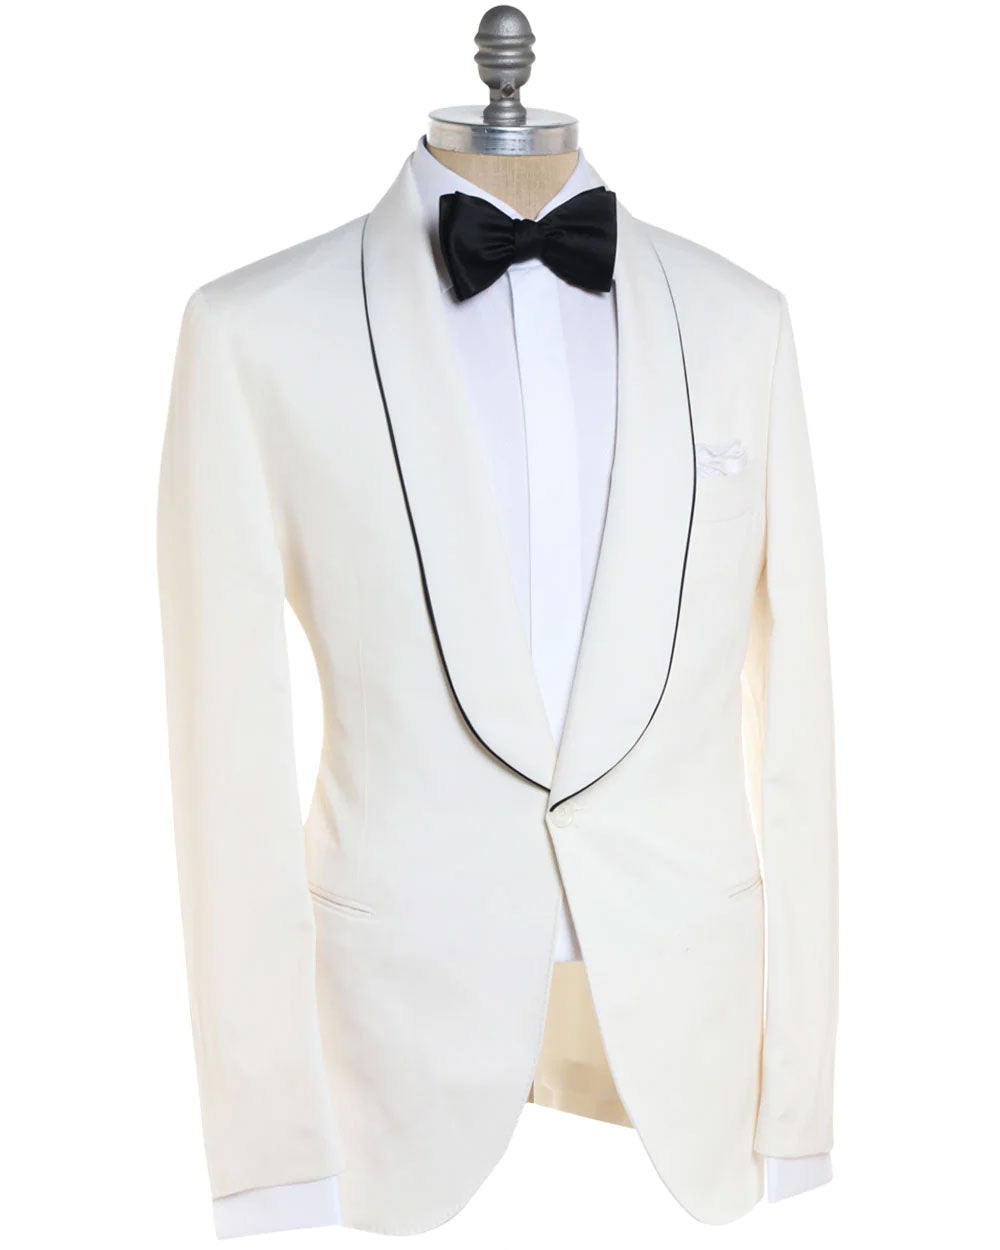 Off White and Black Trimmed Silk Dinner Jacket